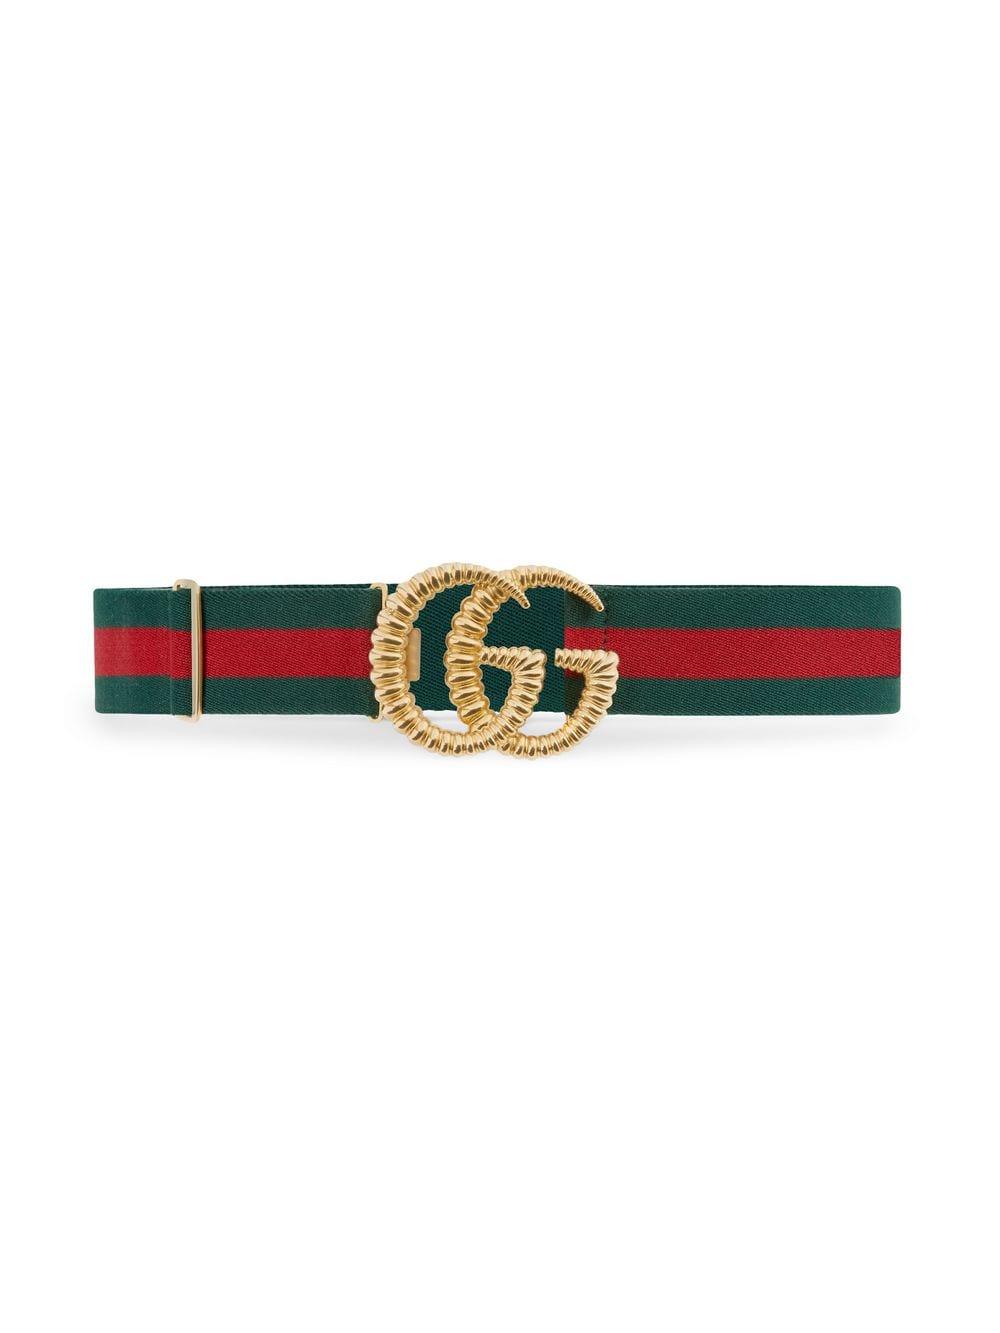 gucci belt white red and green